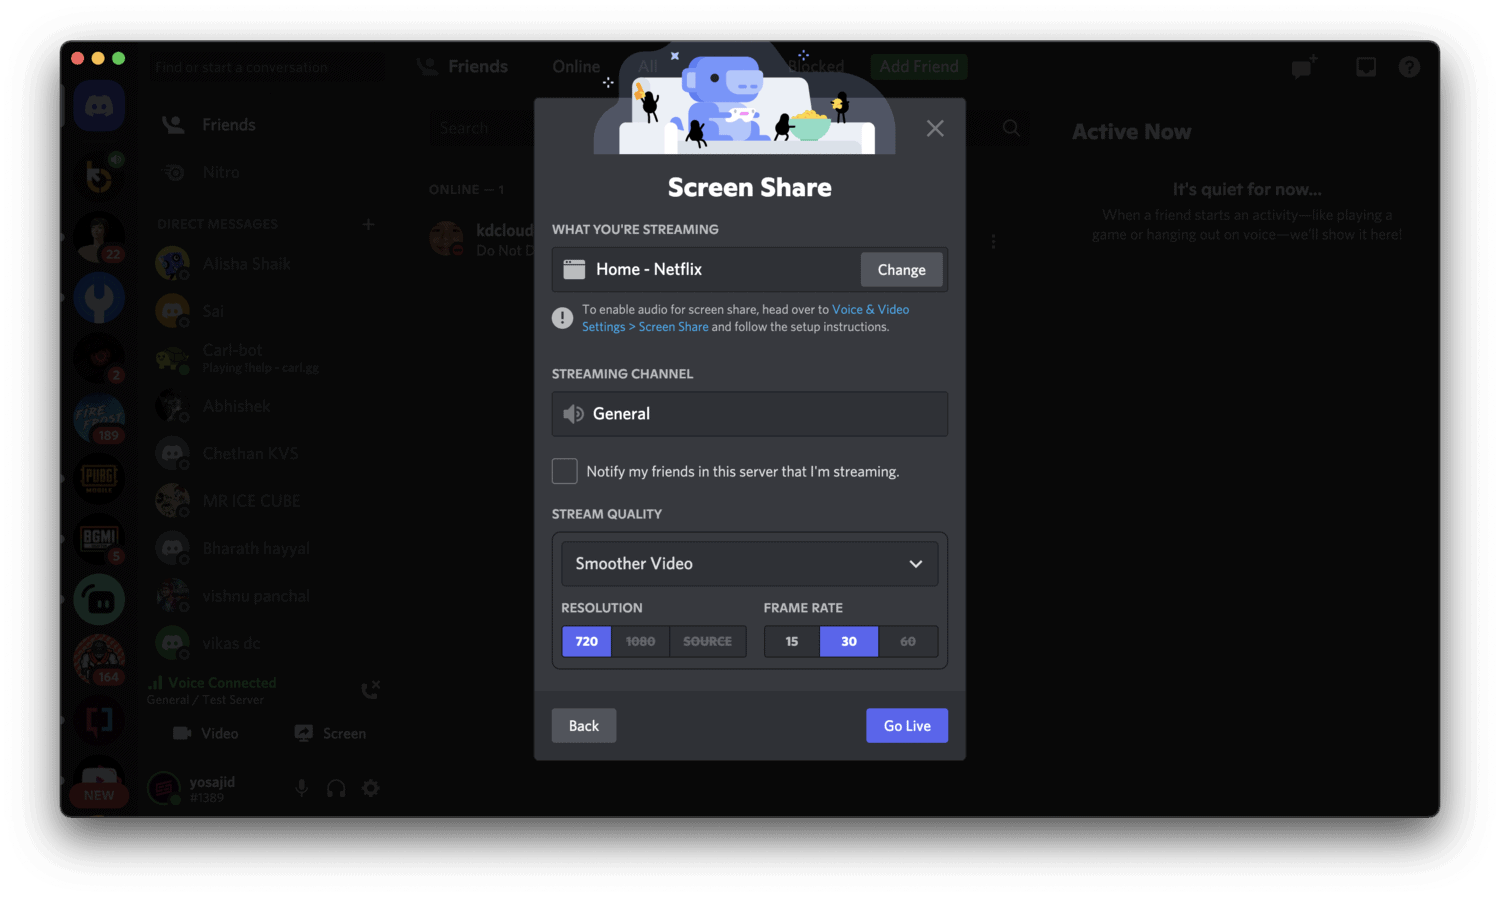 Screen share options on Discord to Stream Netflix